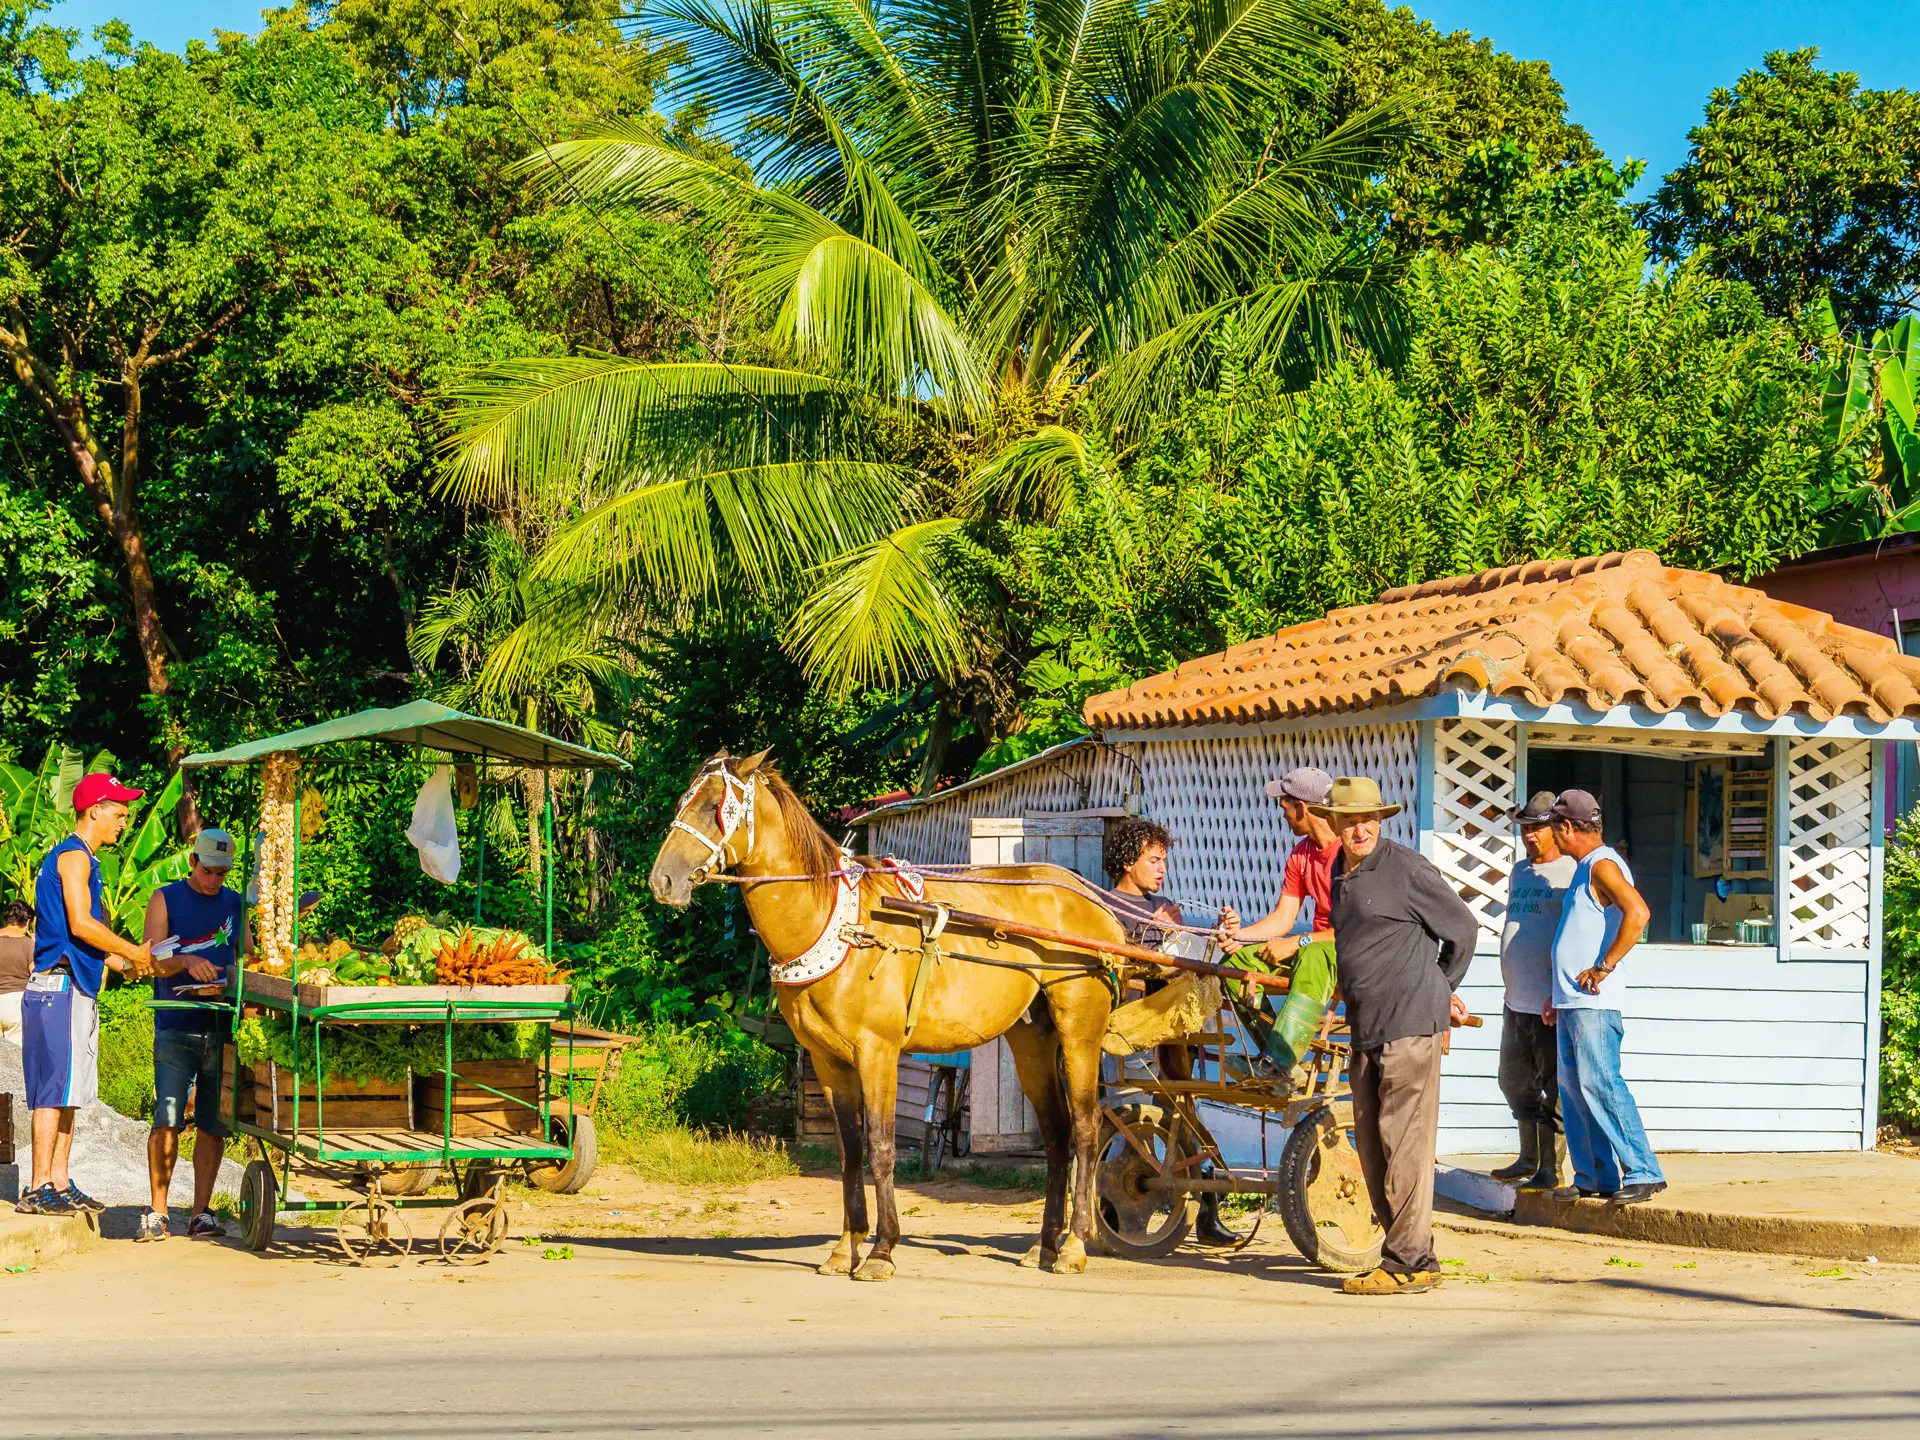 shutterstock_253726642  The main street of Vinales with street stalls.jpg